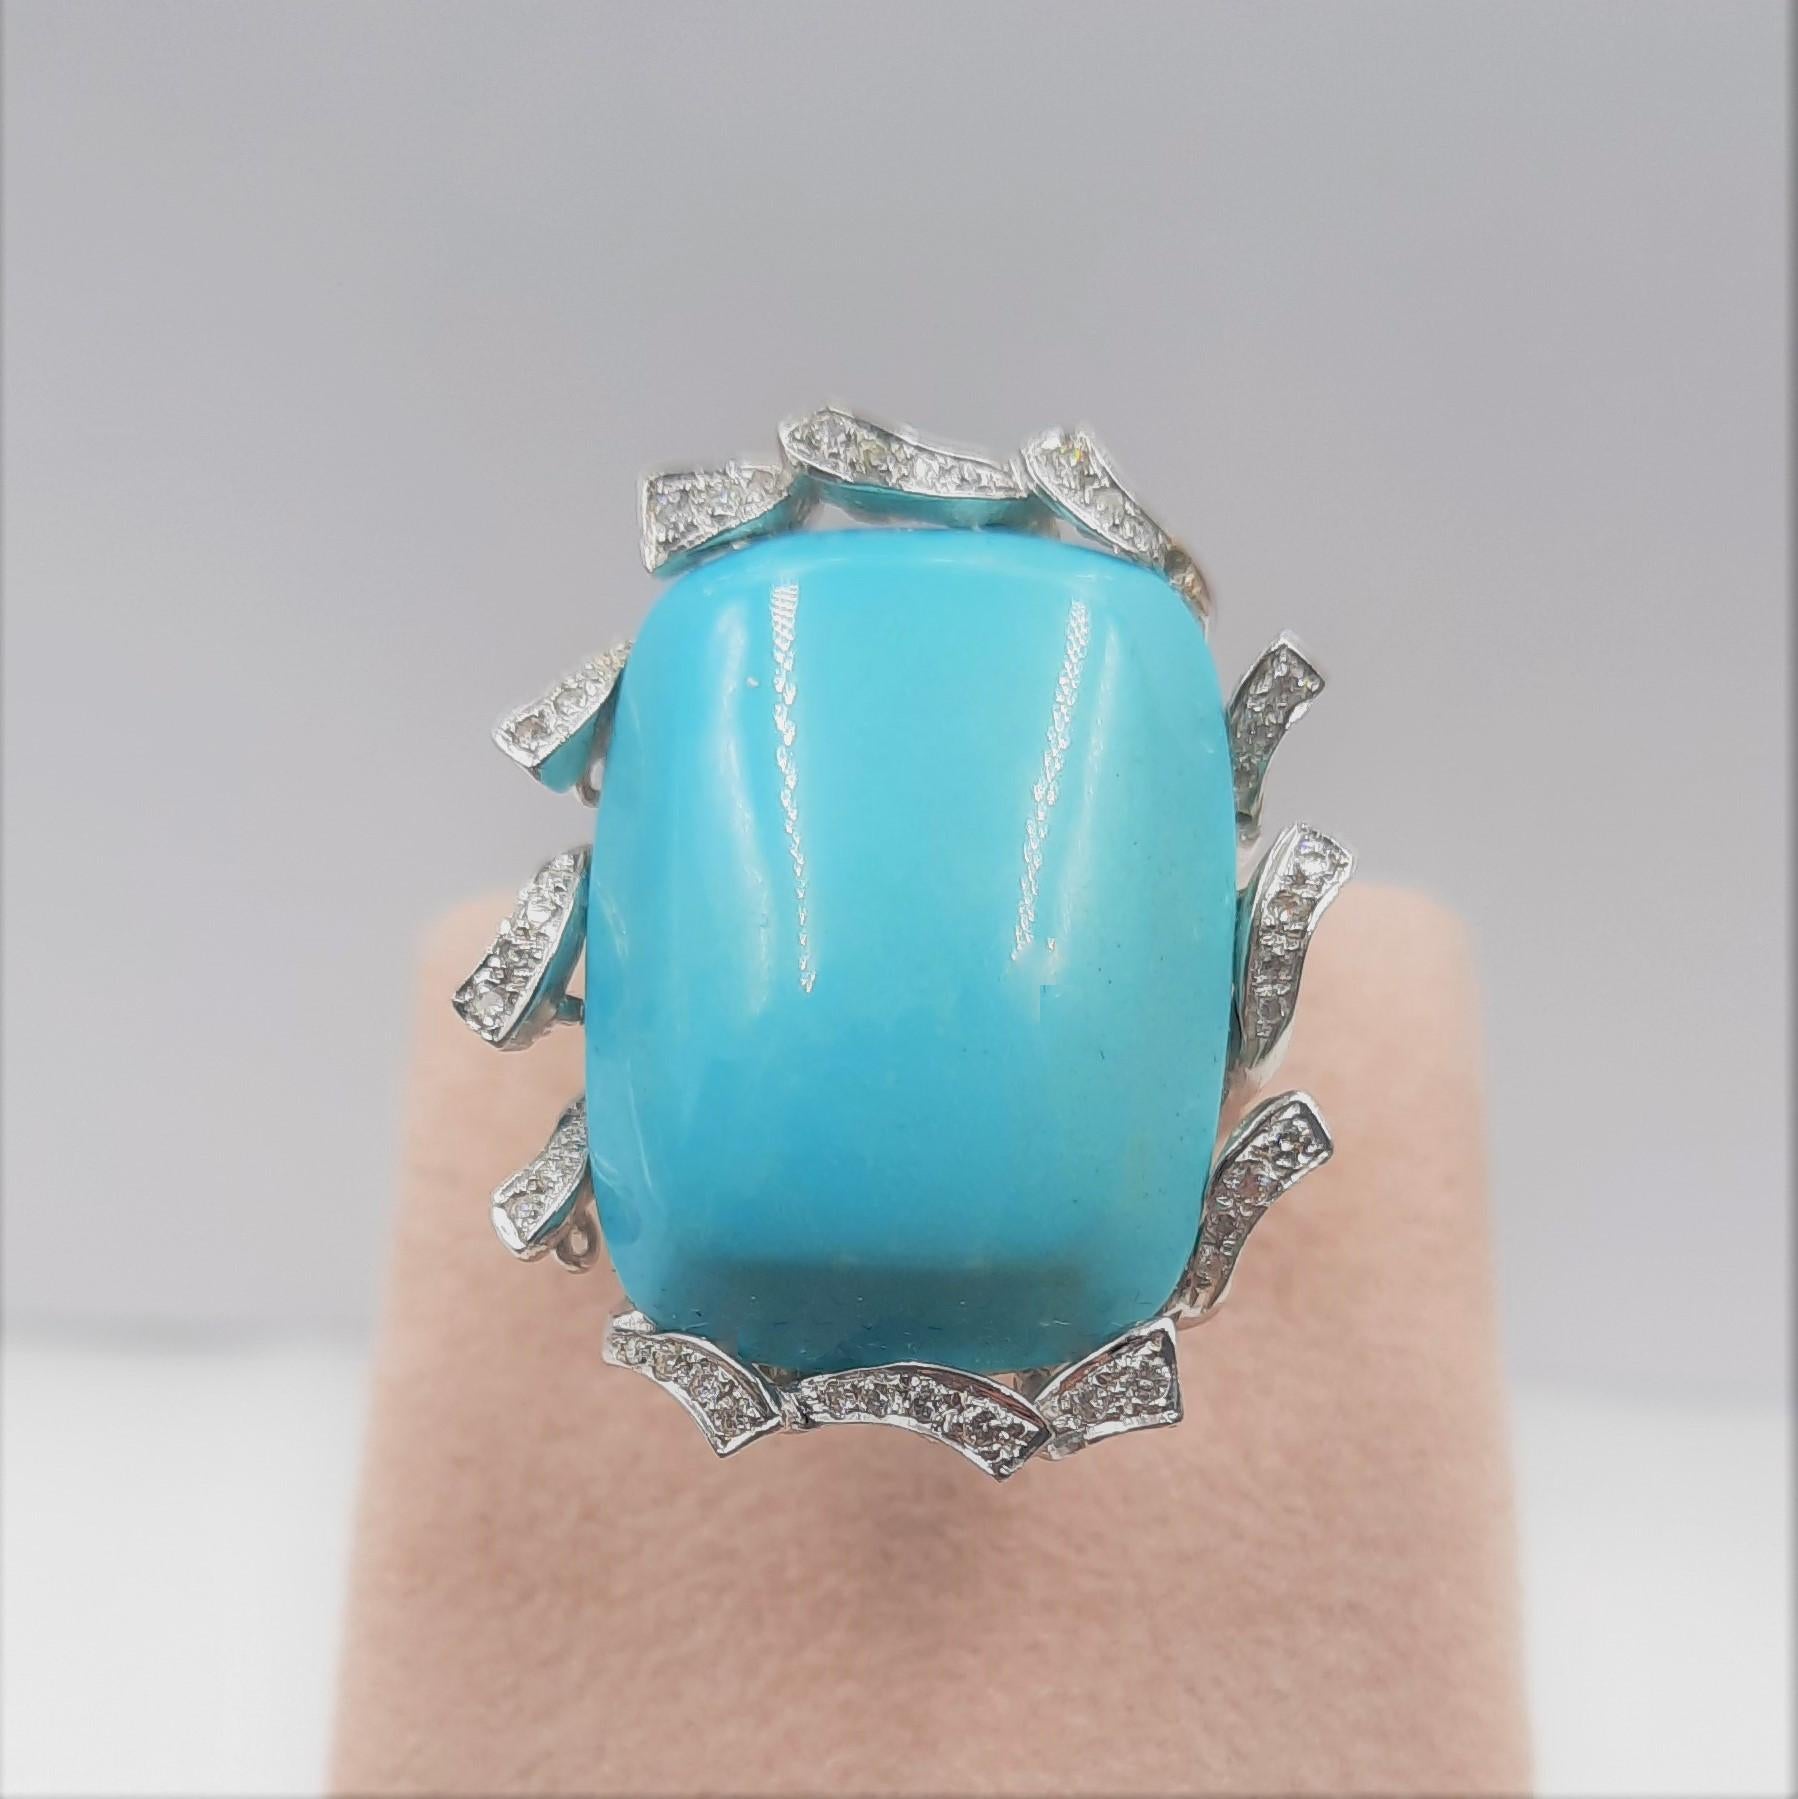 Elegant turquoise  (4.5 grams), Brilliant cut diamond (0.3 carats) and 18 carats white gold (13.4 grams) cocktail ring.